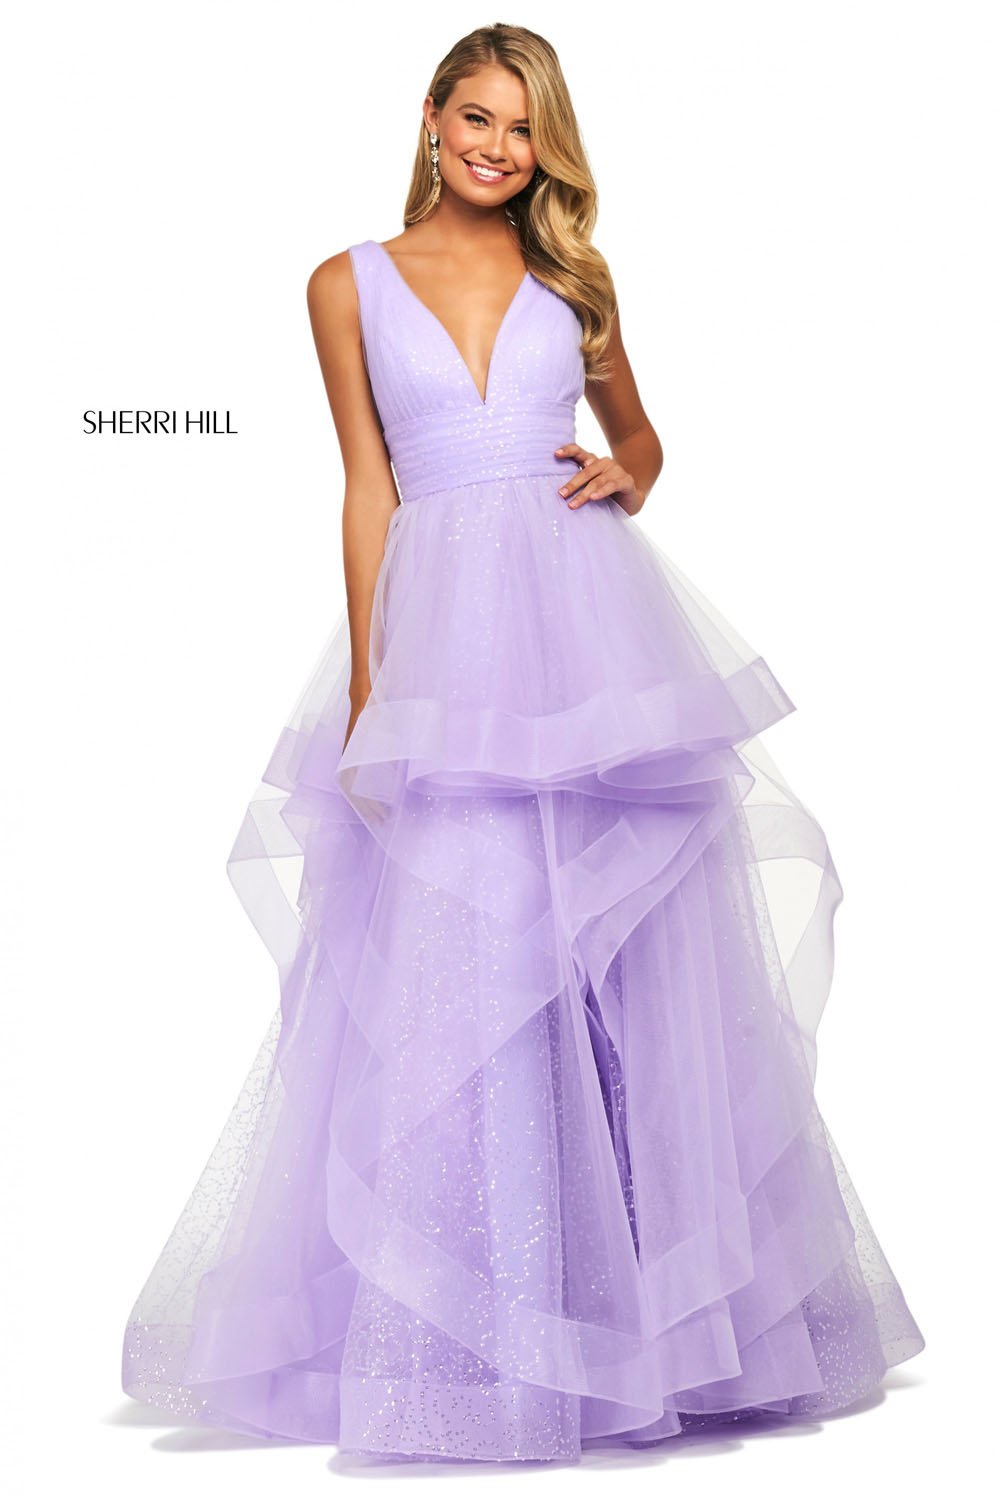 Sherri Hill 53586 dress images in these colors: Ivory, Light Blue, Black, Lilac, Yellow, Blush, Coral.